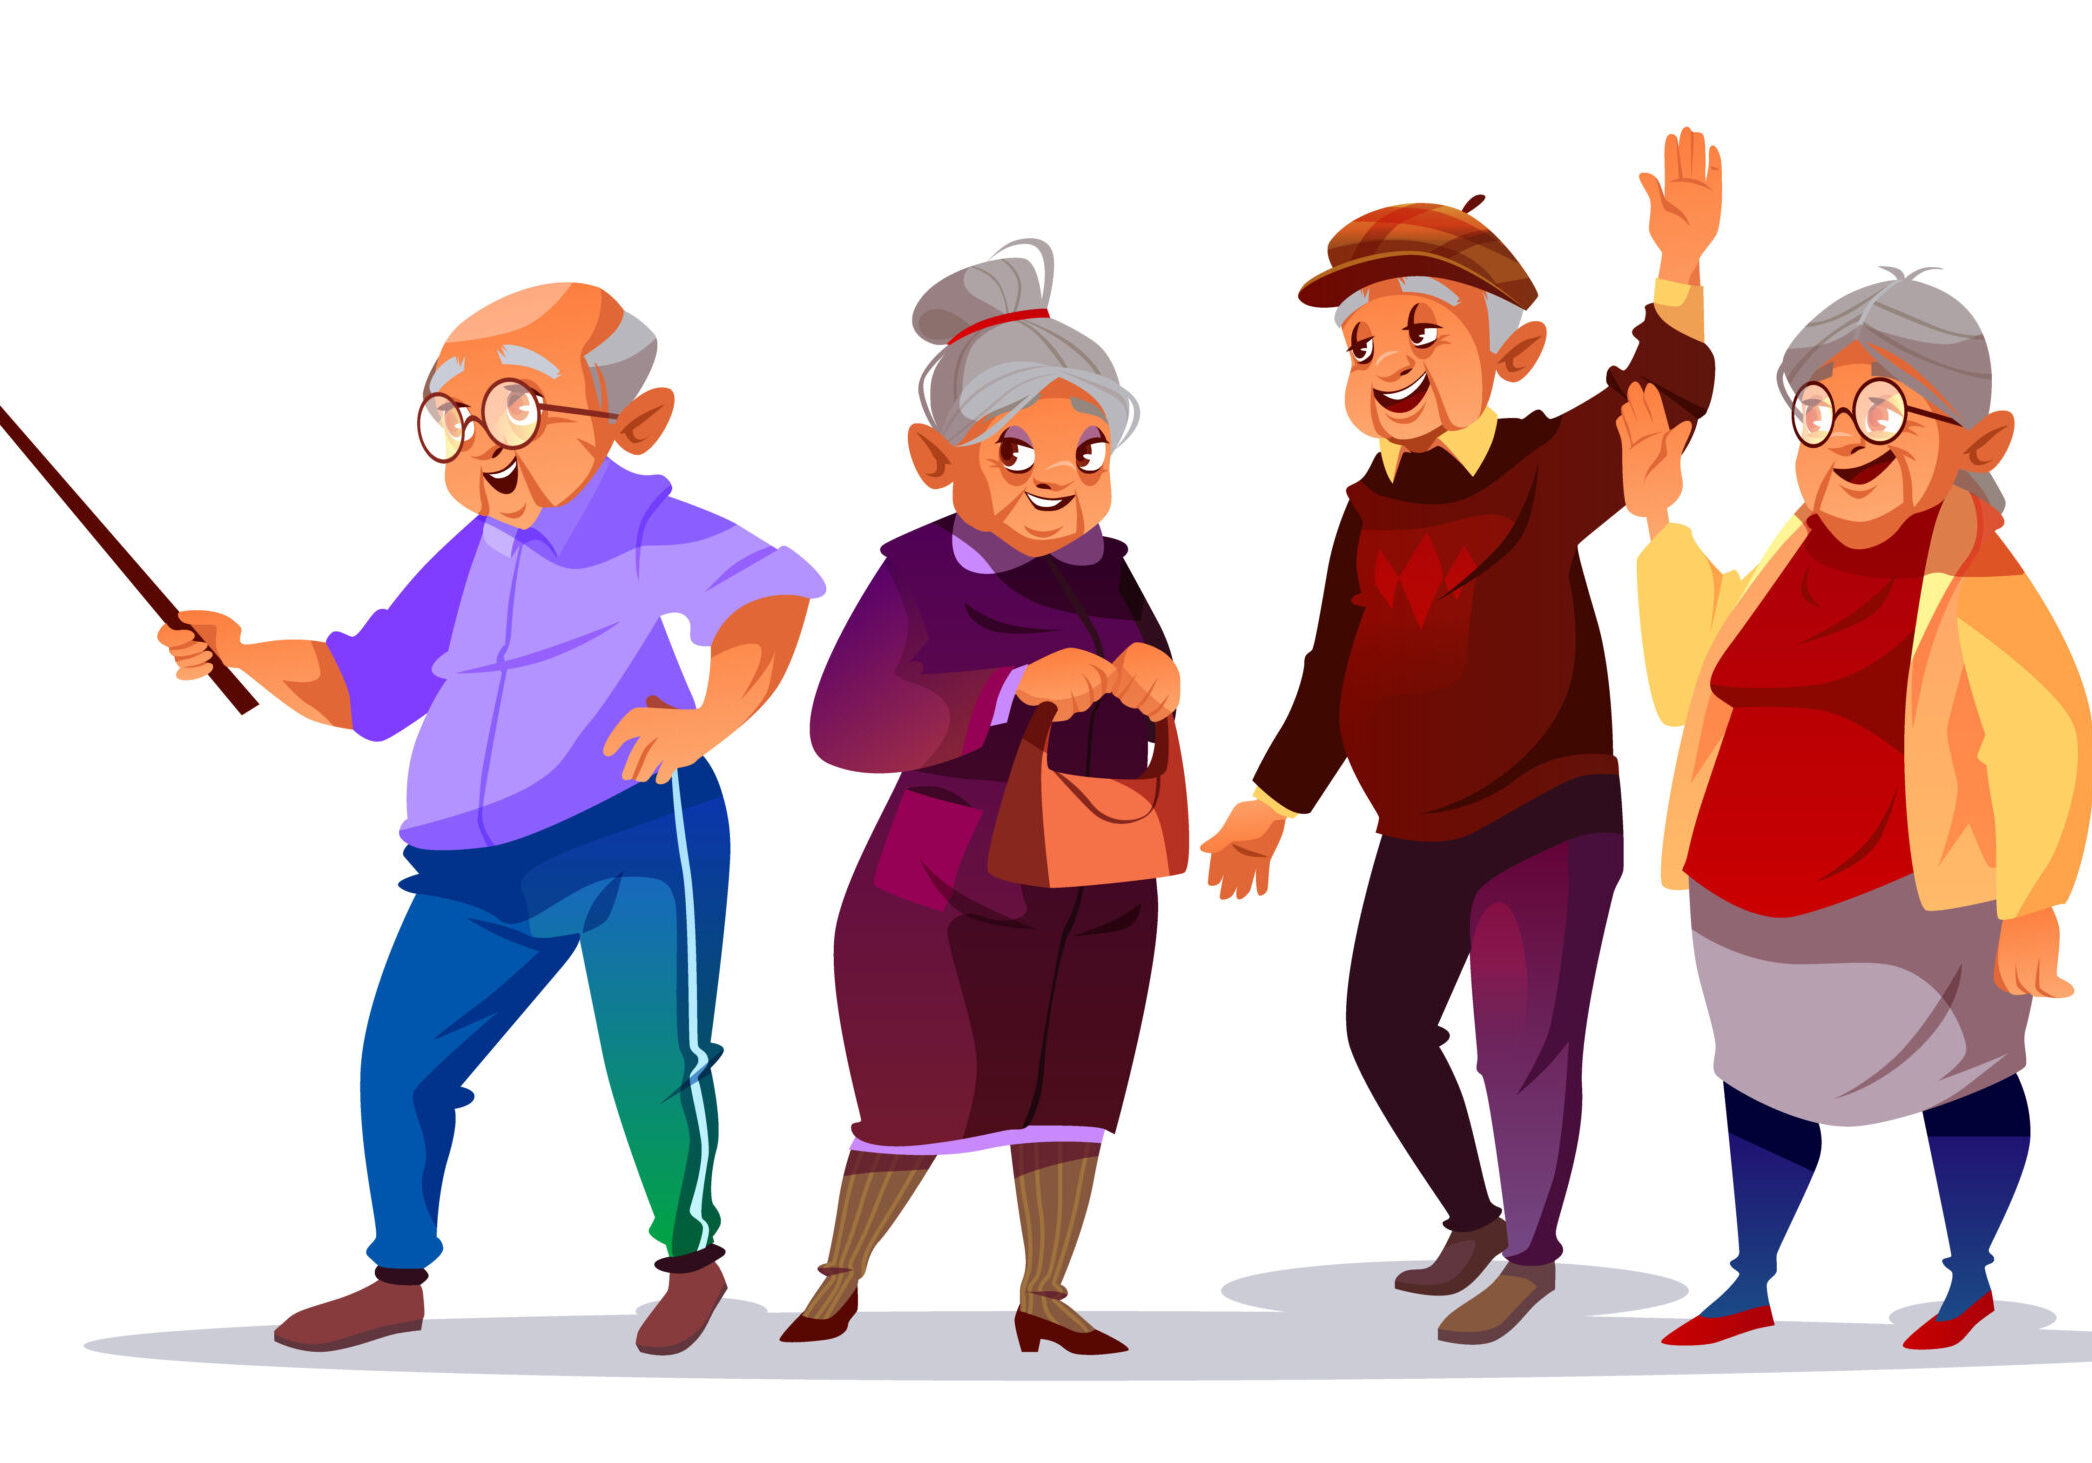 Old people making photo selfie vector illustration. Cartoon elderly man and woman smiling with hello hand gesture for smartphone photograph on vacation or travel